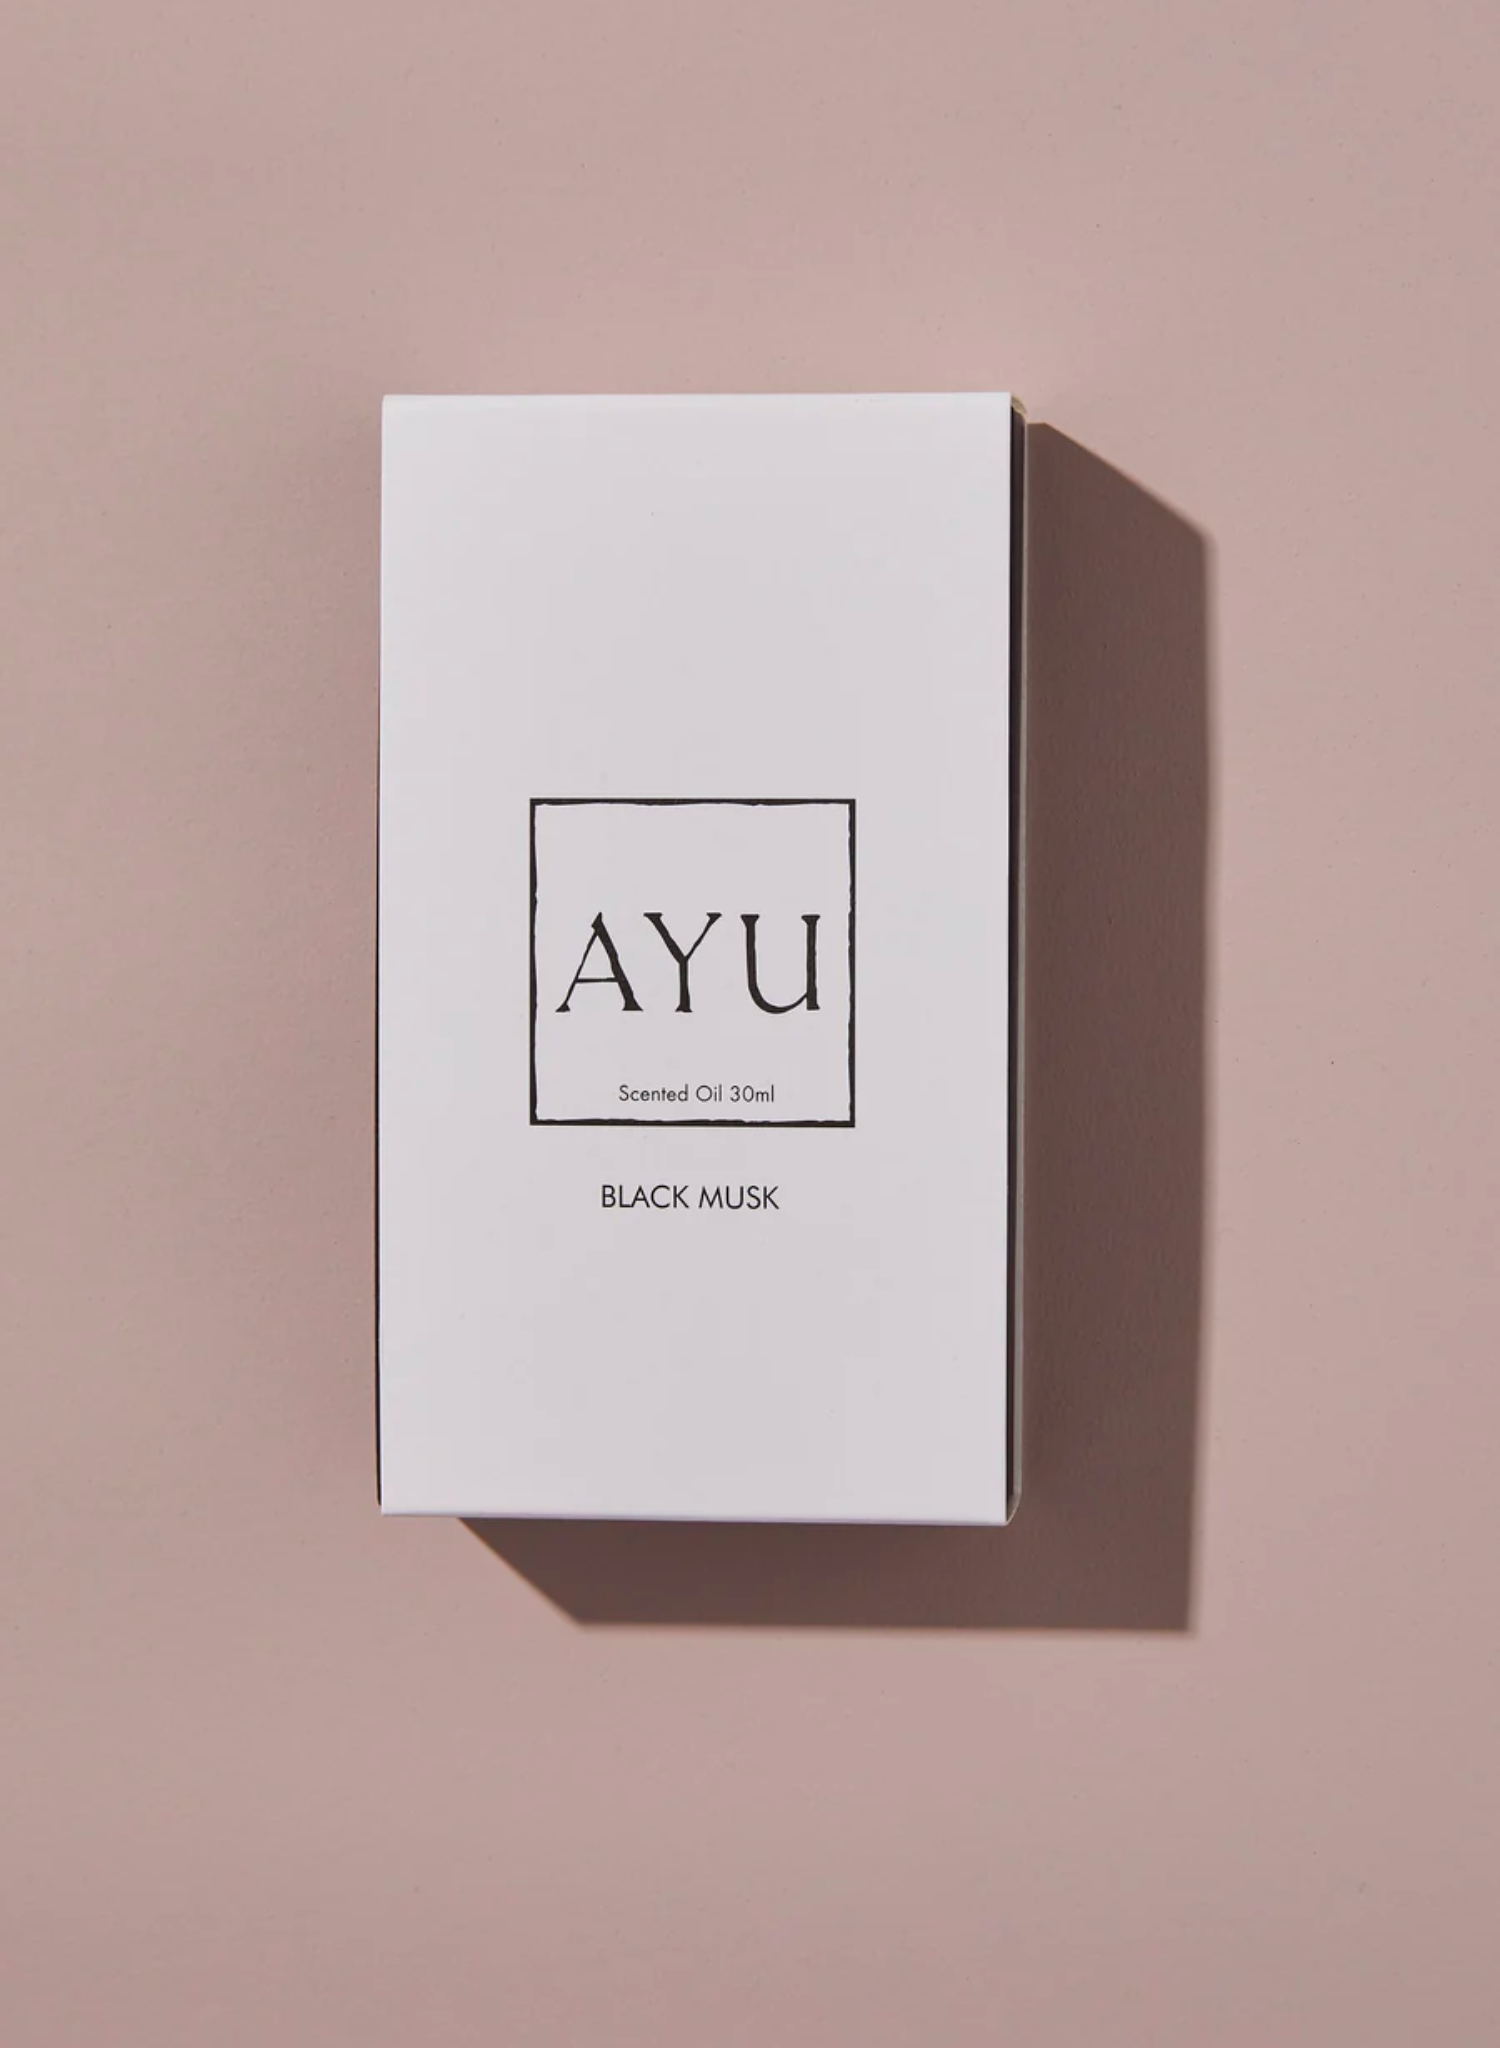 Black Musk takes you deep into the forest where the earth is rich and exotic plants blossom in secret. Sacred labdanum and jasmine petals are tangled in woody notes of vetiver, agarwood, henna and sandalwood, transforming a tender floral into a dark powerful aroma that grounds and mesmerises the senses.